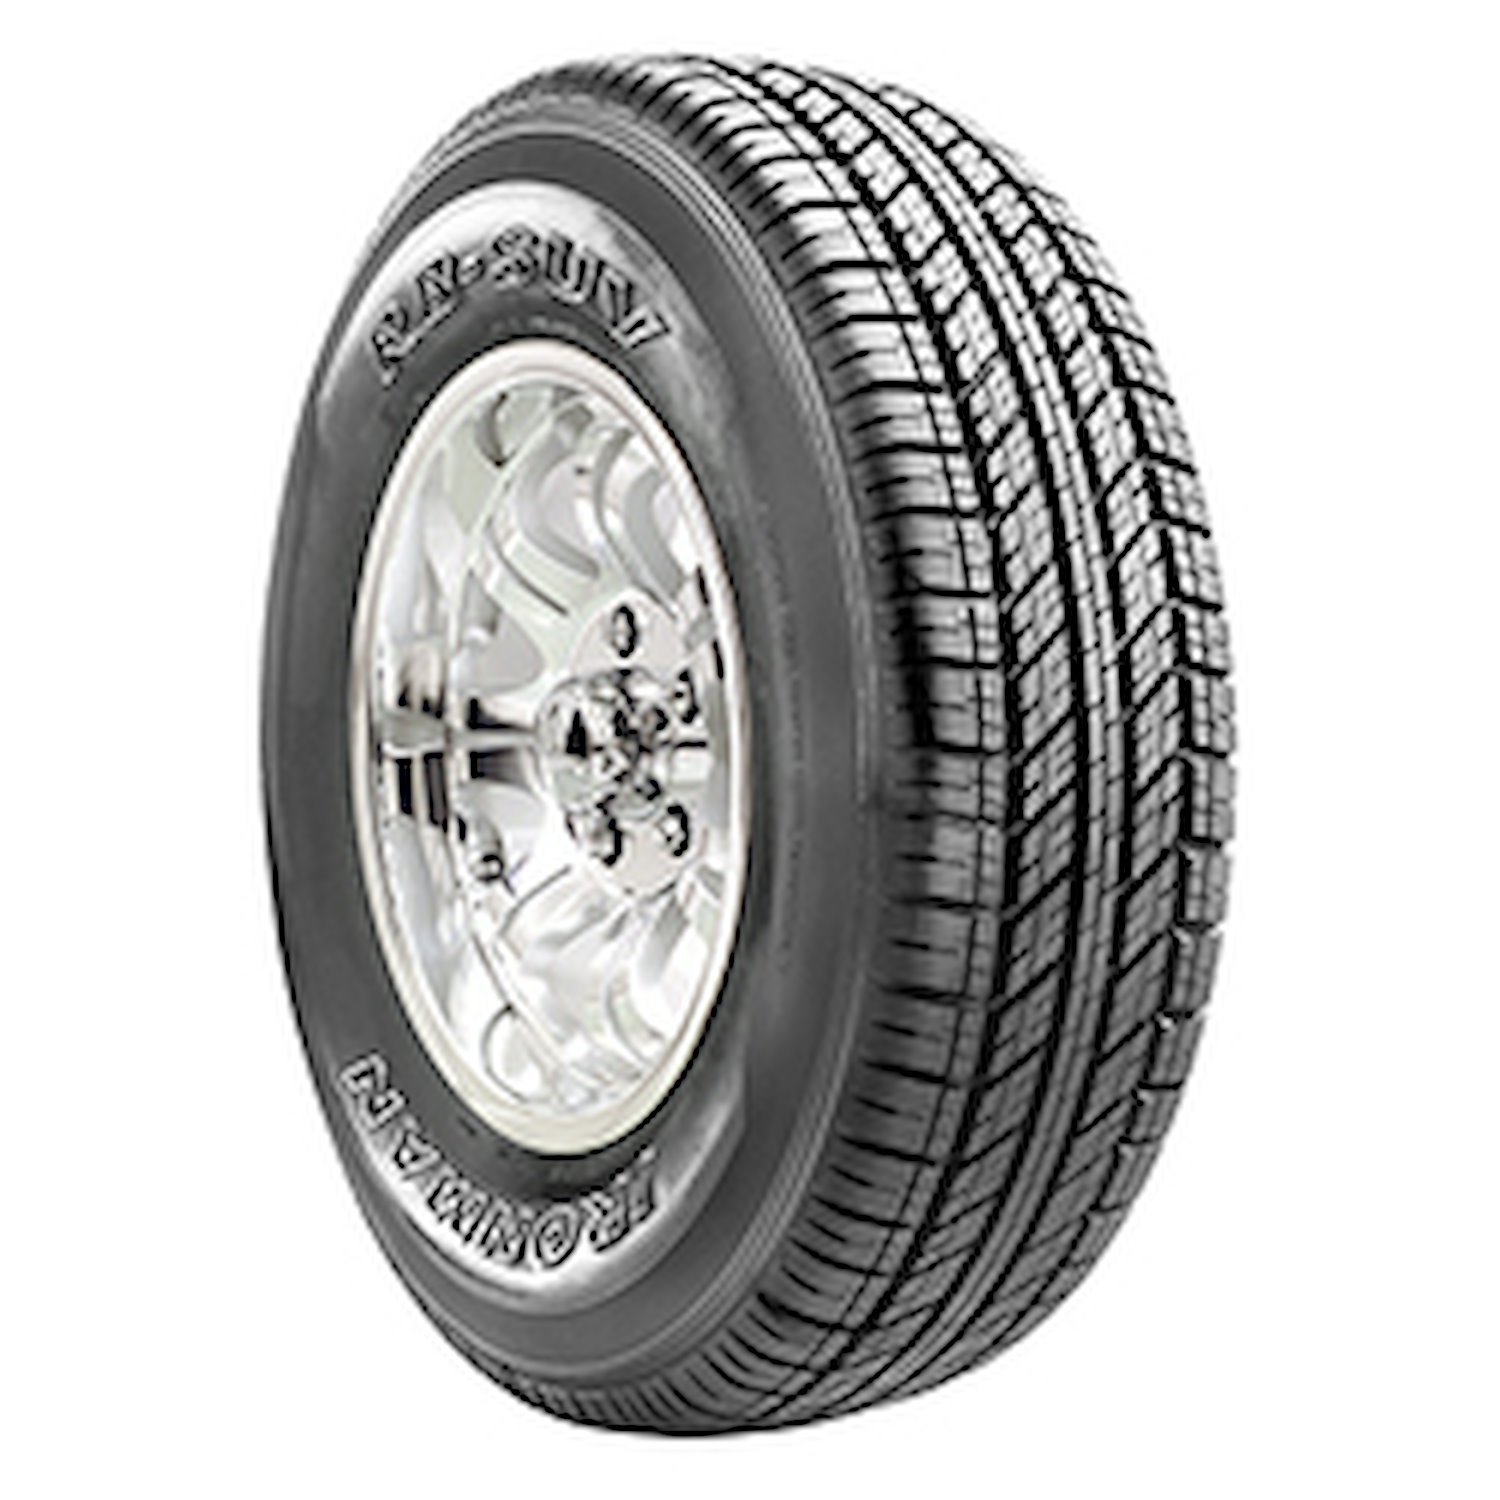 RB SUV Tire, 265/75R16 116S